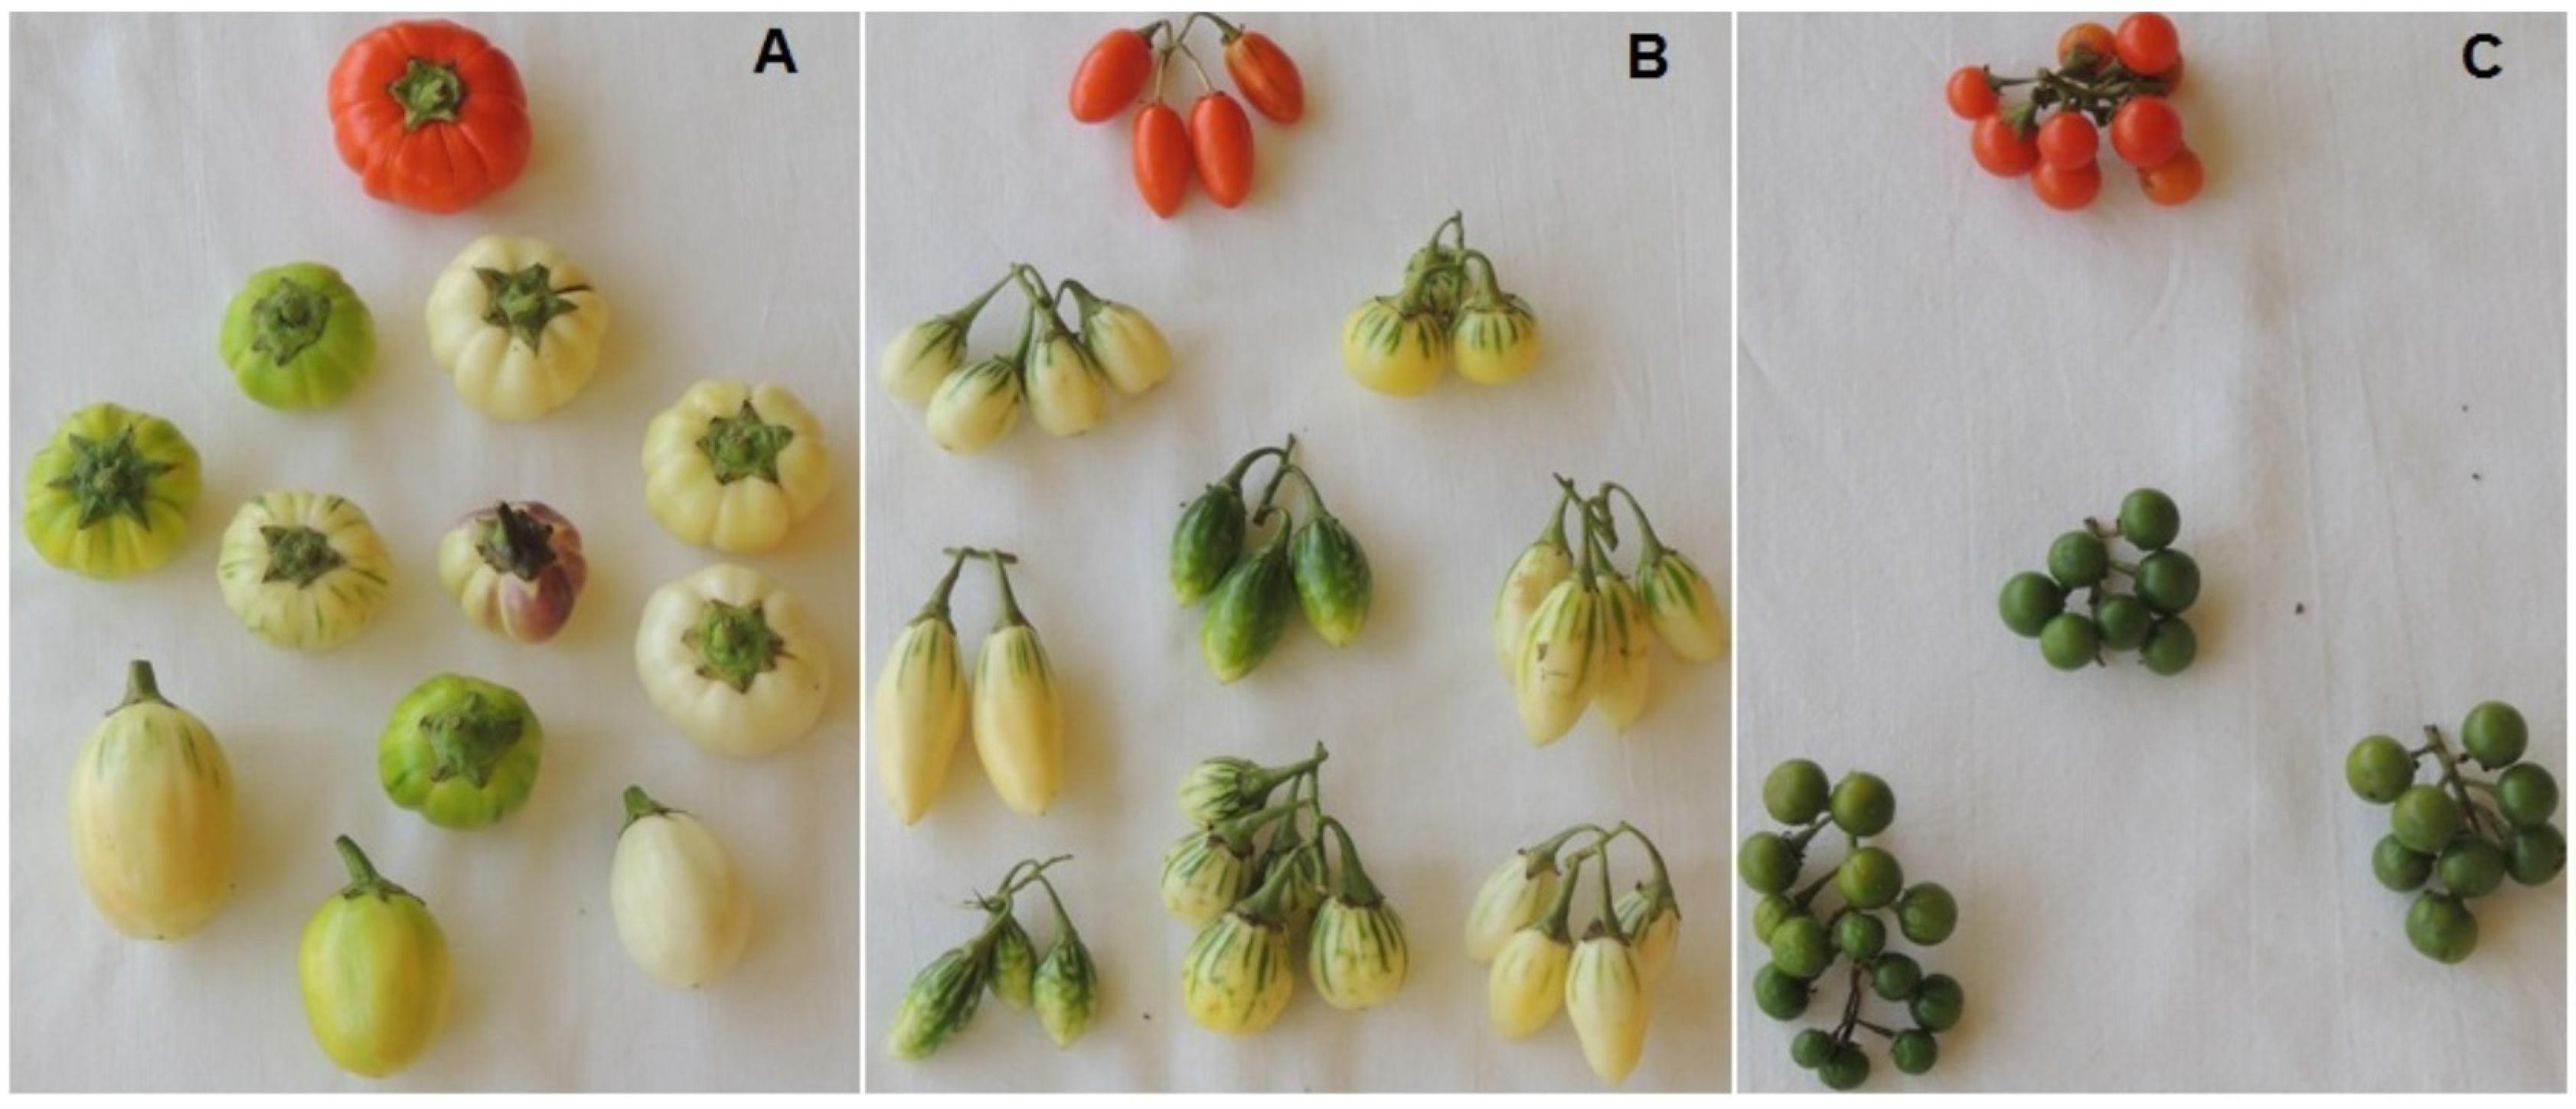 Journal of Plant Breeding and Crop Science - agromorphological  characterization of scarlet eggplant (solanum aethiopicum l.) grown in the  republic of benin